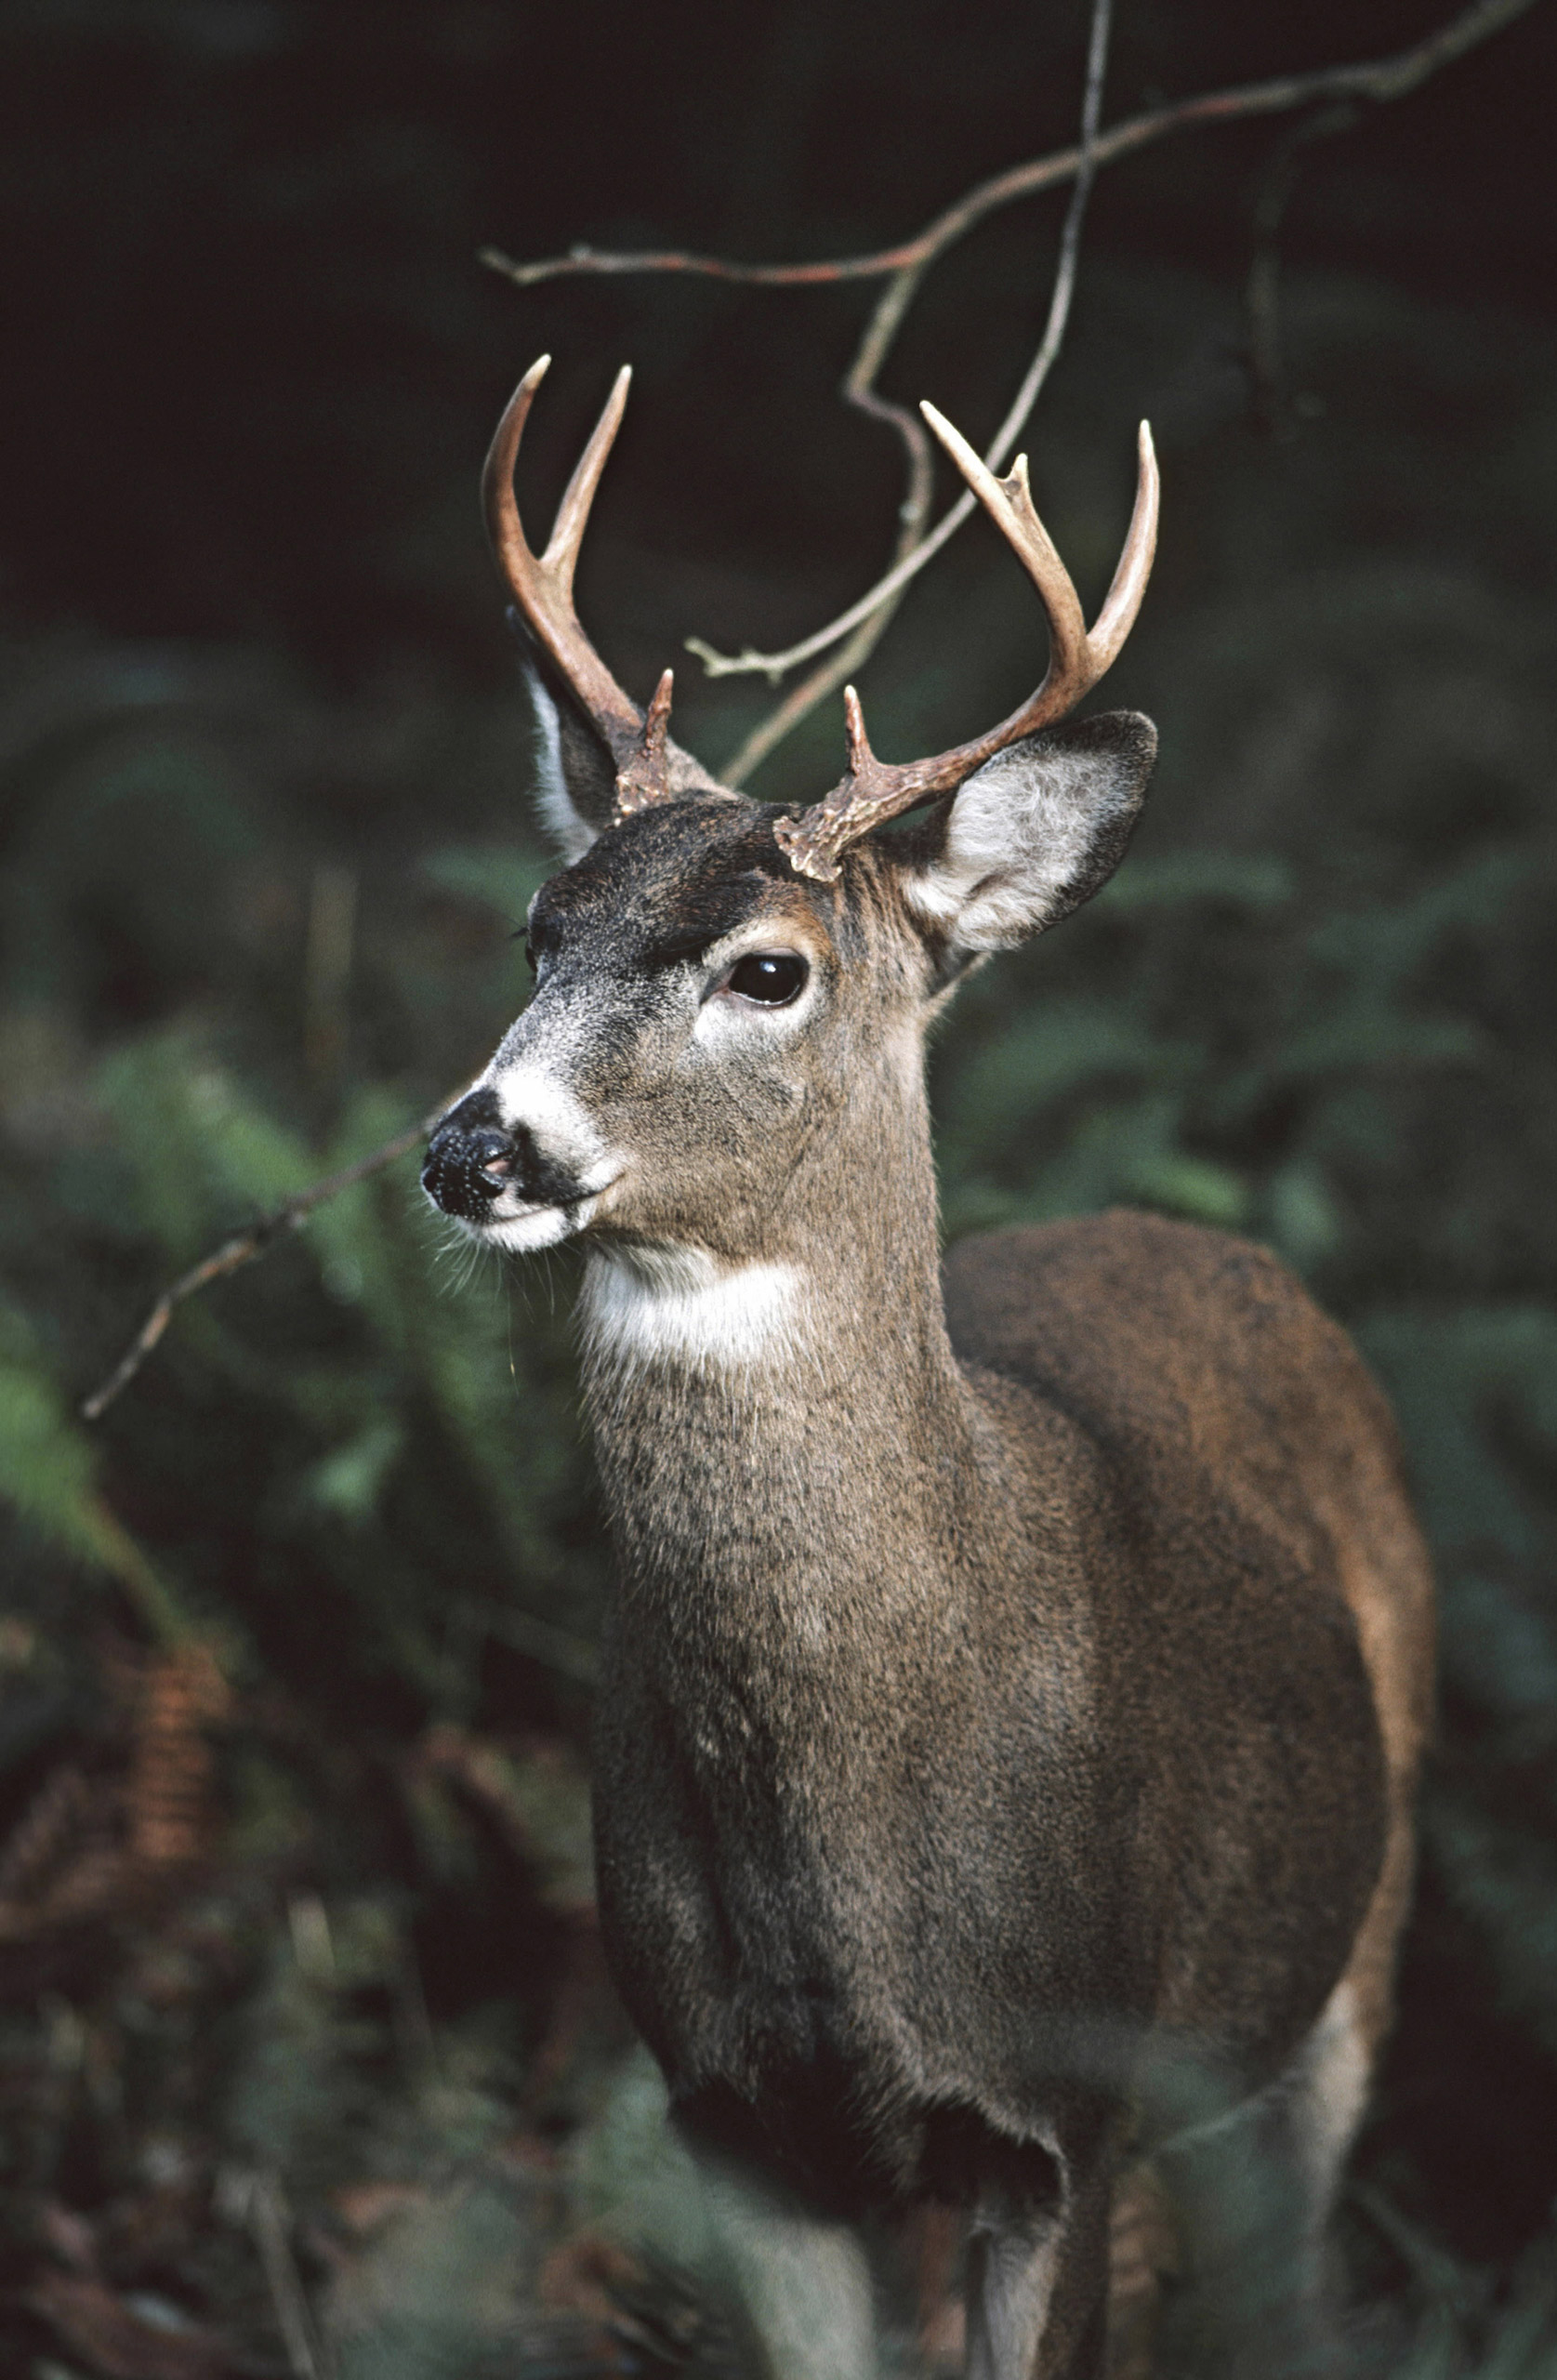 Columbian White-tailed Deer, Odocoileus virginianus leucurus.Status: Endangered in the area surrounding the Columbia River, though under consideration for downgrading to 'threatened' status, and delisted in 2003 due to recovery in Douglas County, Ore.